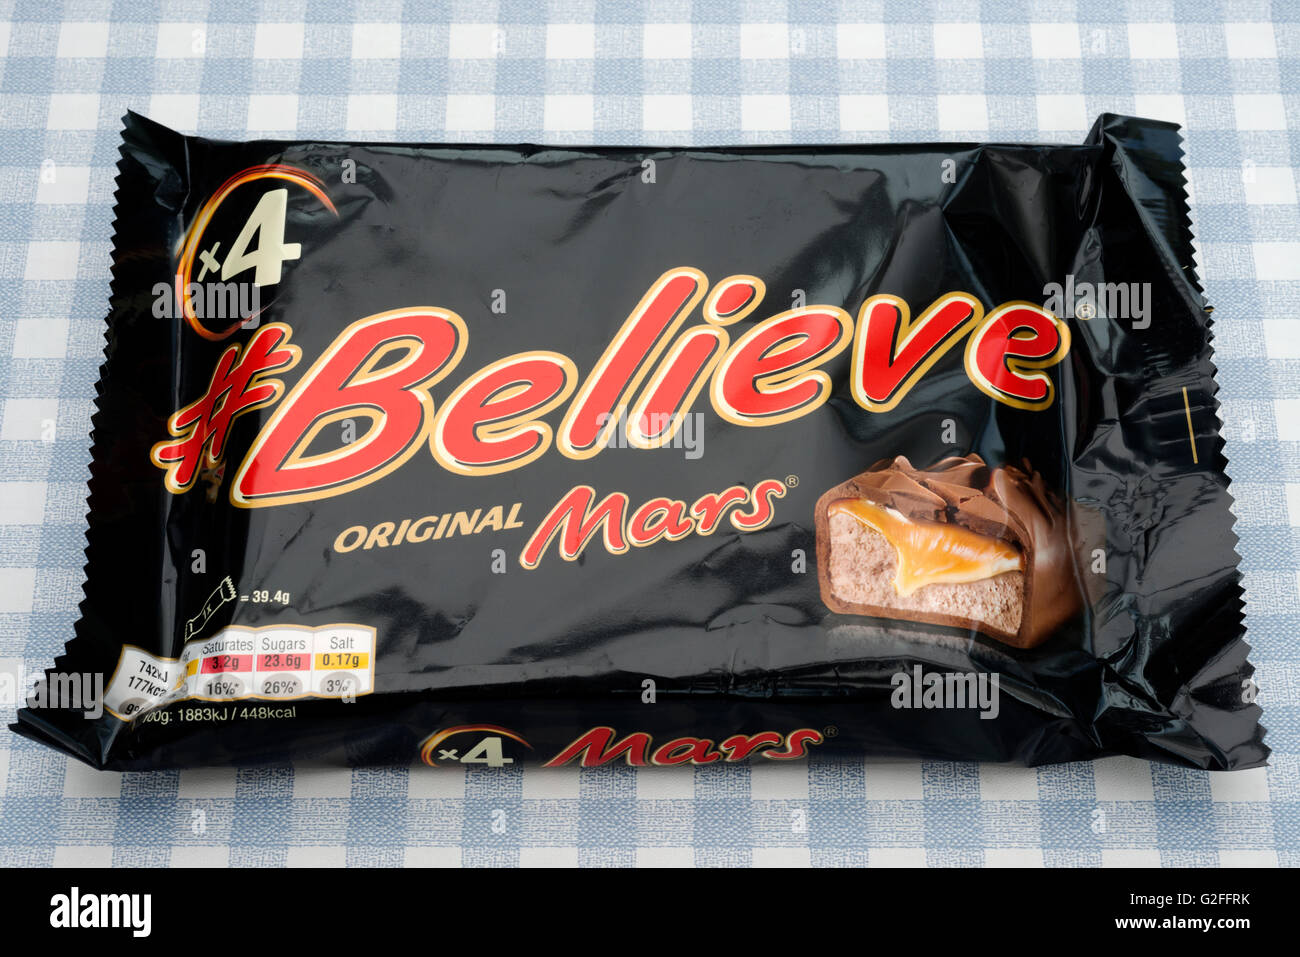 Mars chocolate bars with Believe packaging Stock Photo